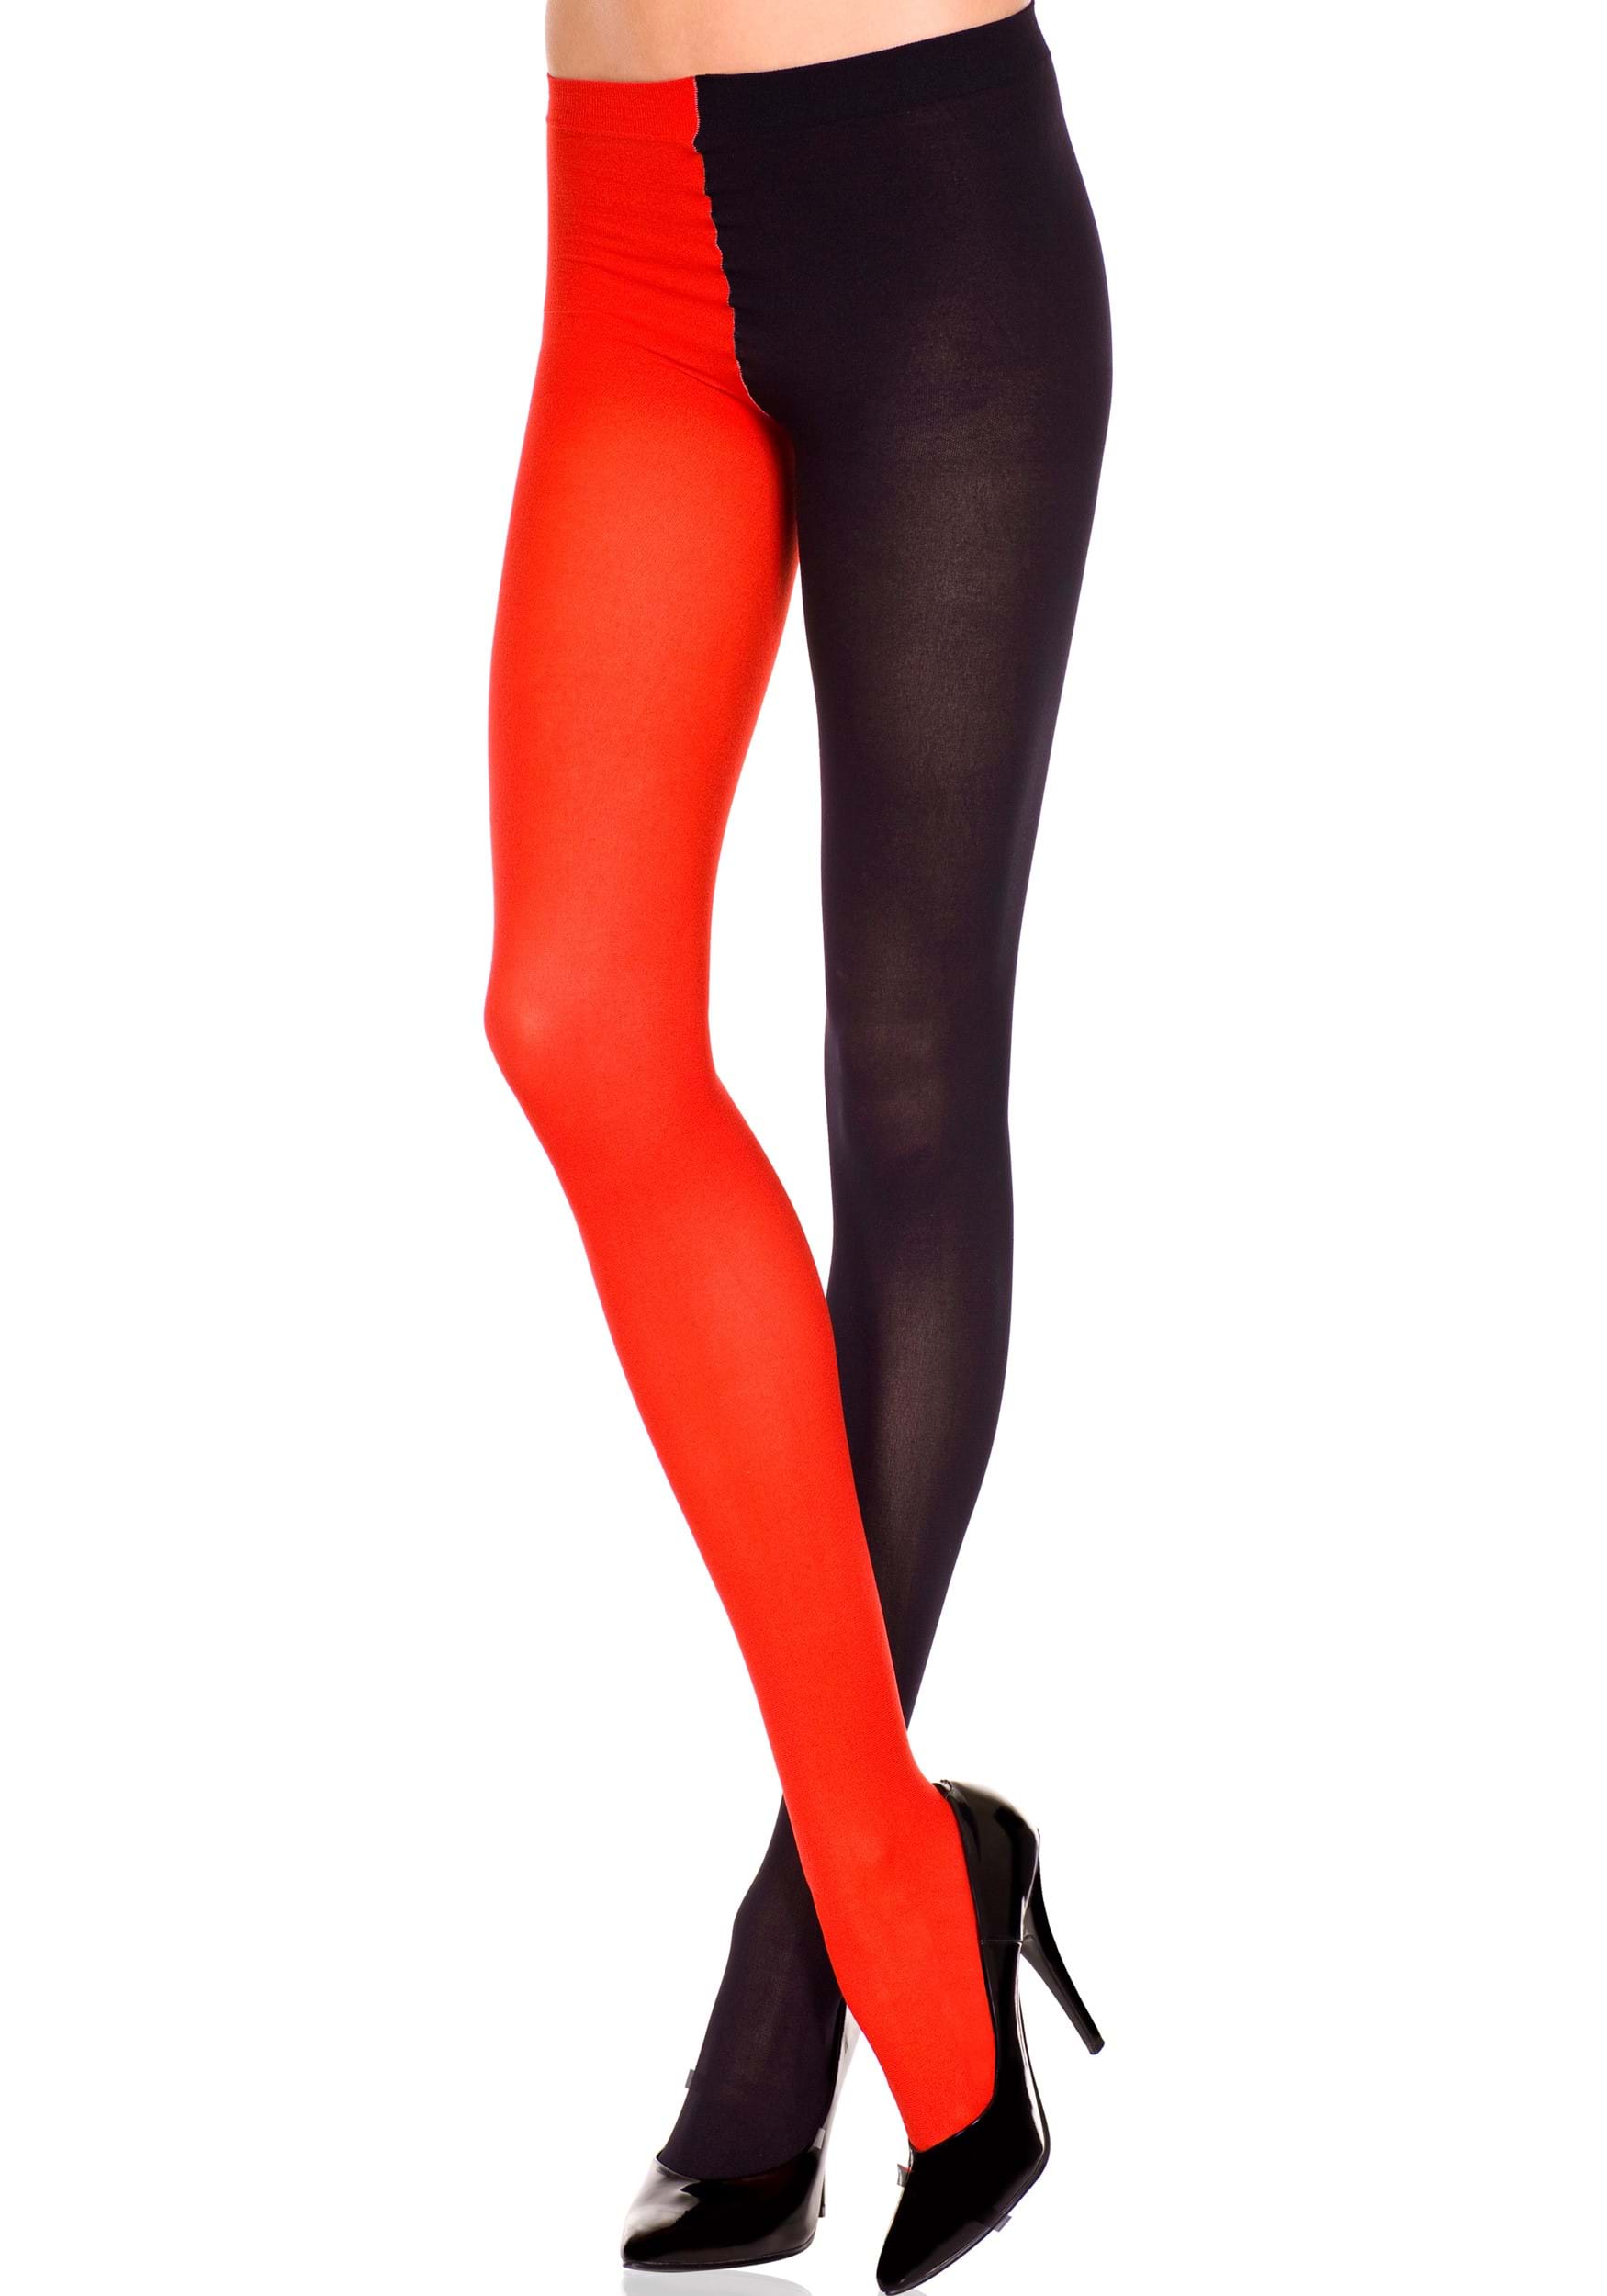 https://images.halloweencostumes.co.uk/products/32389/1-1/plus-size-opaque-jester-tights.jpg